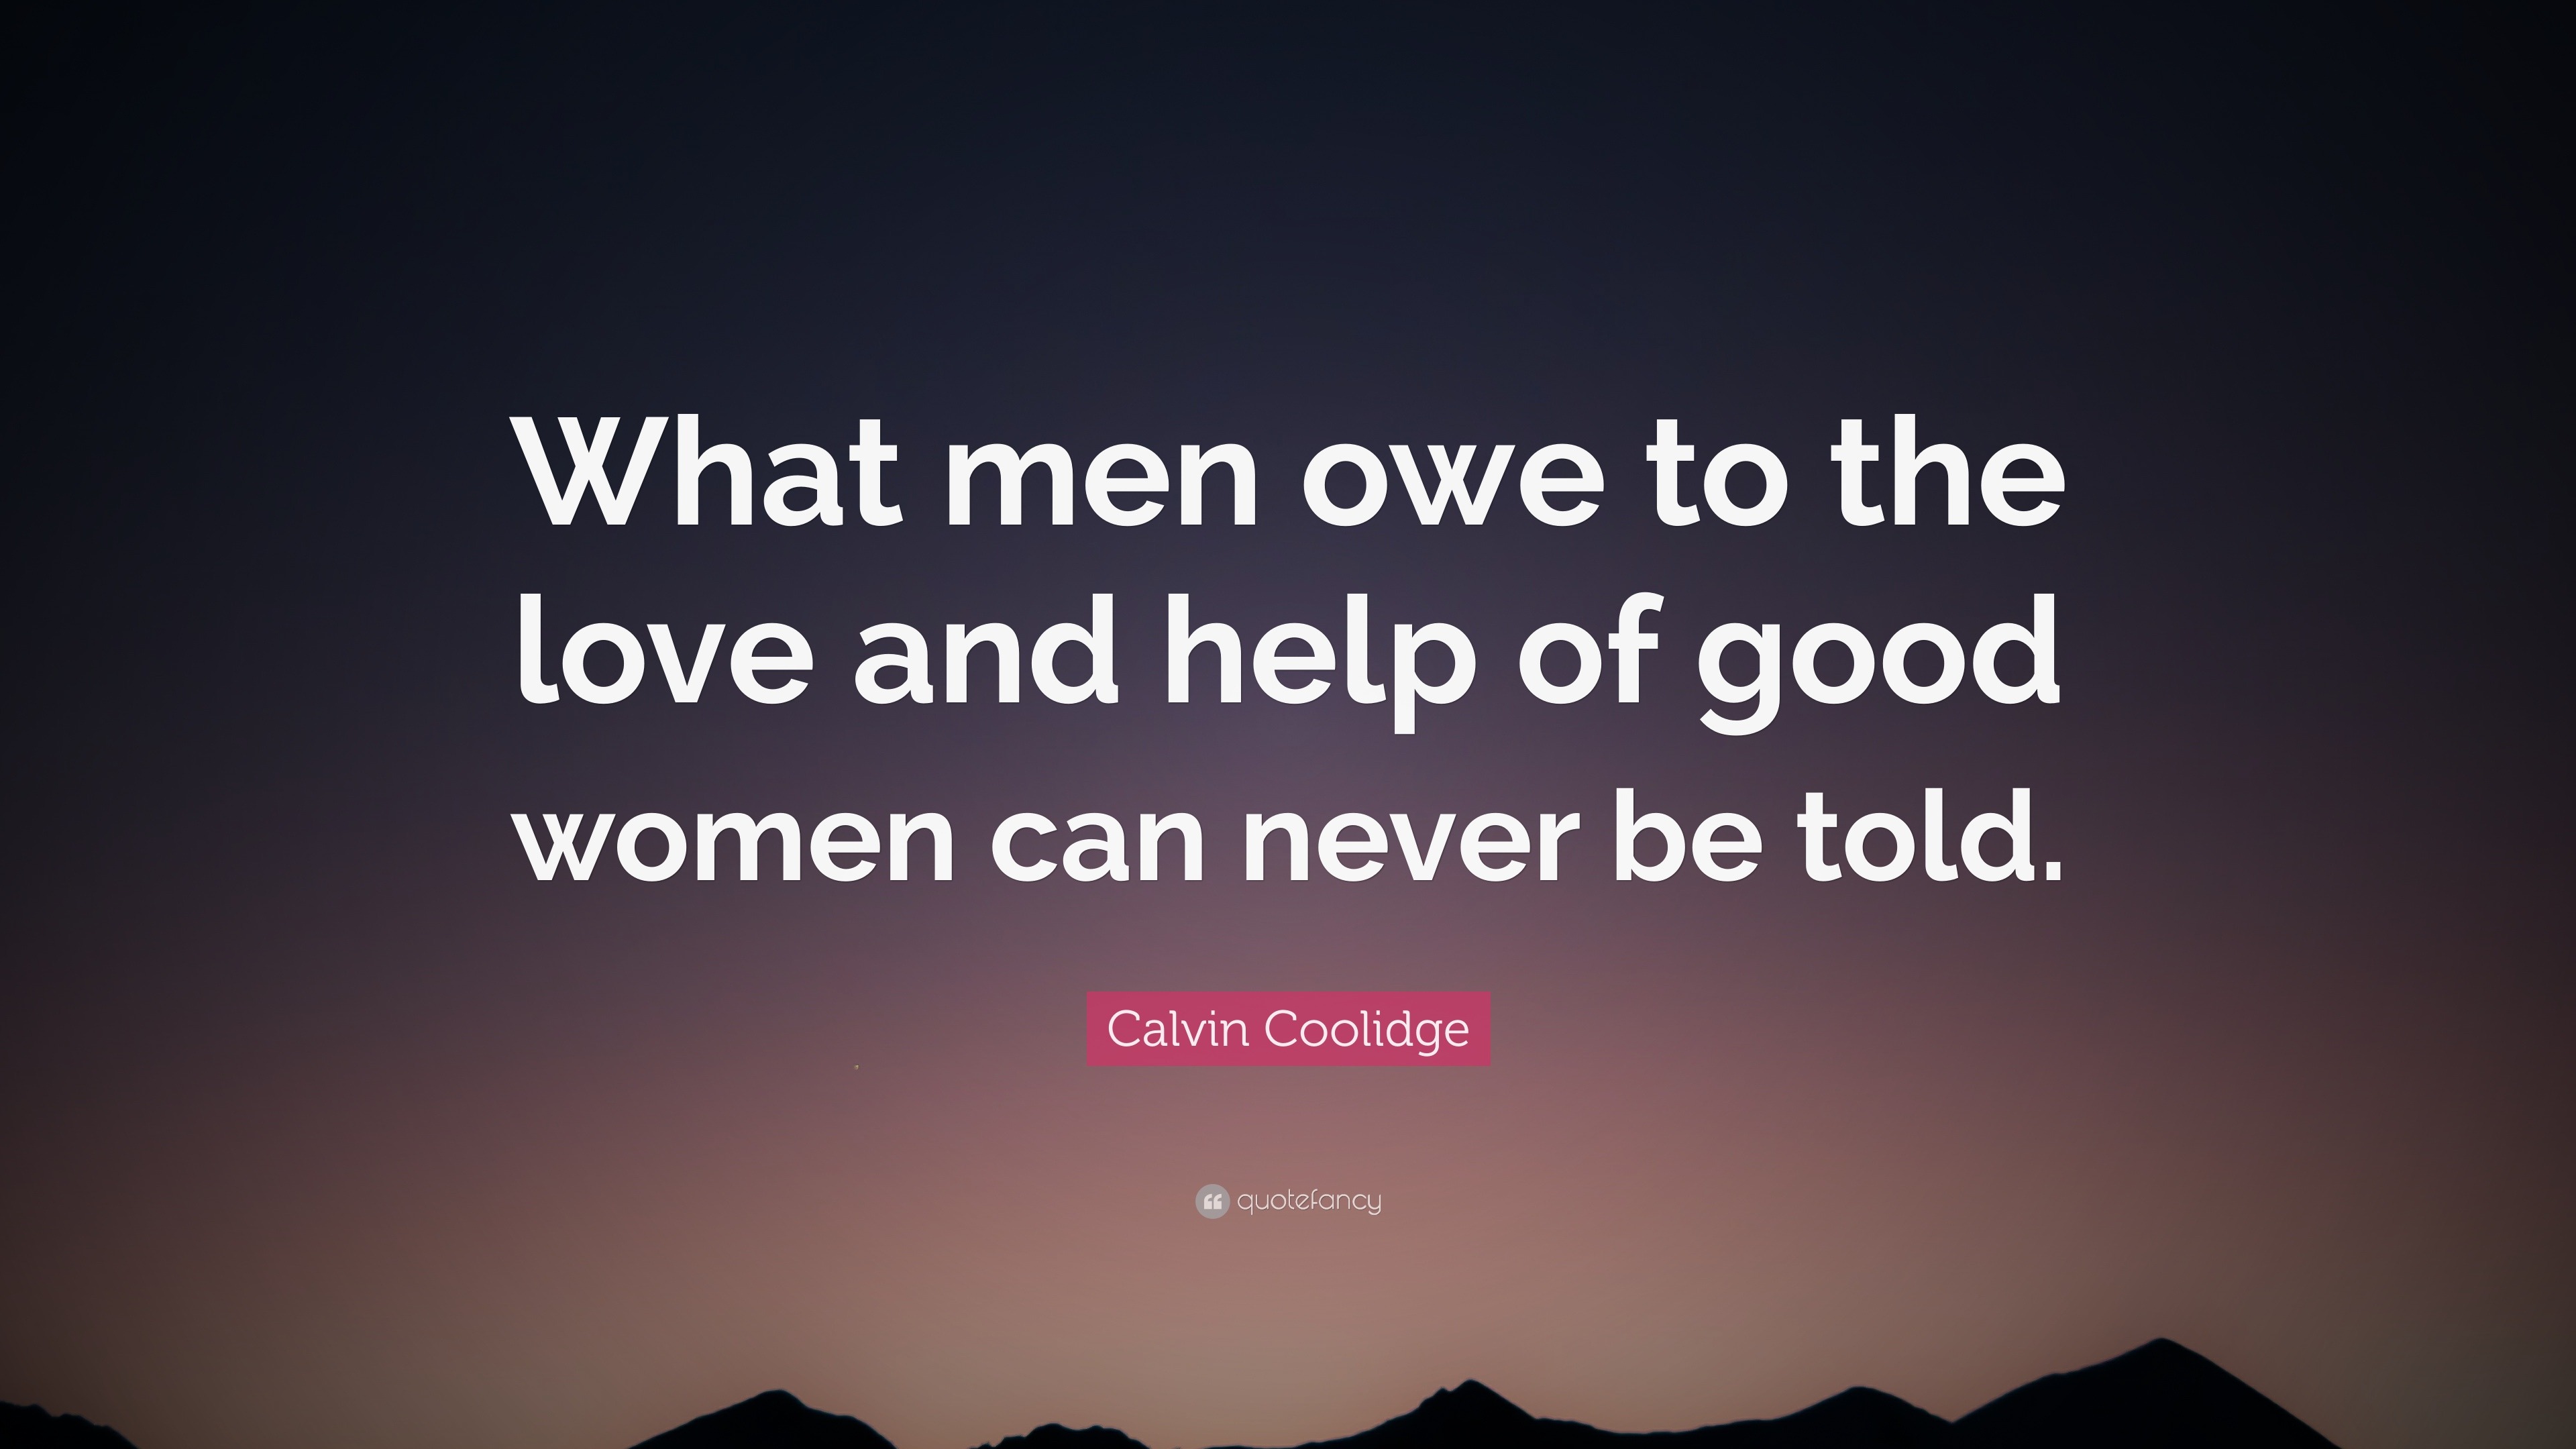 Calvin Coolidge Quote What men owe to the love and help of good women